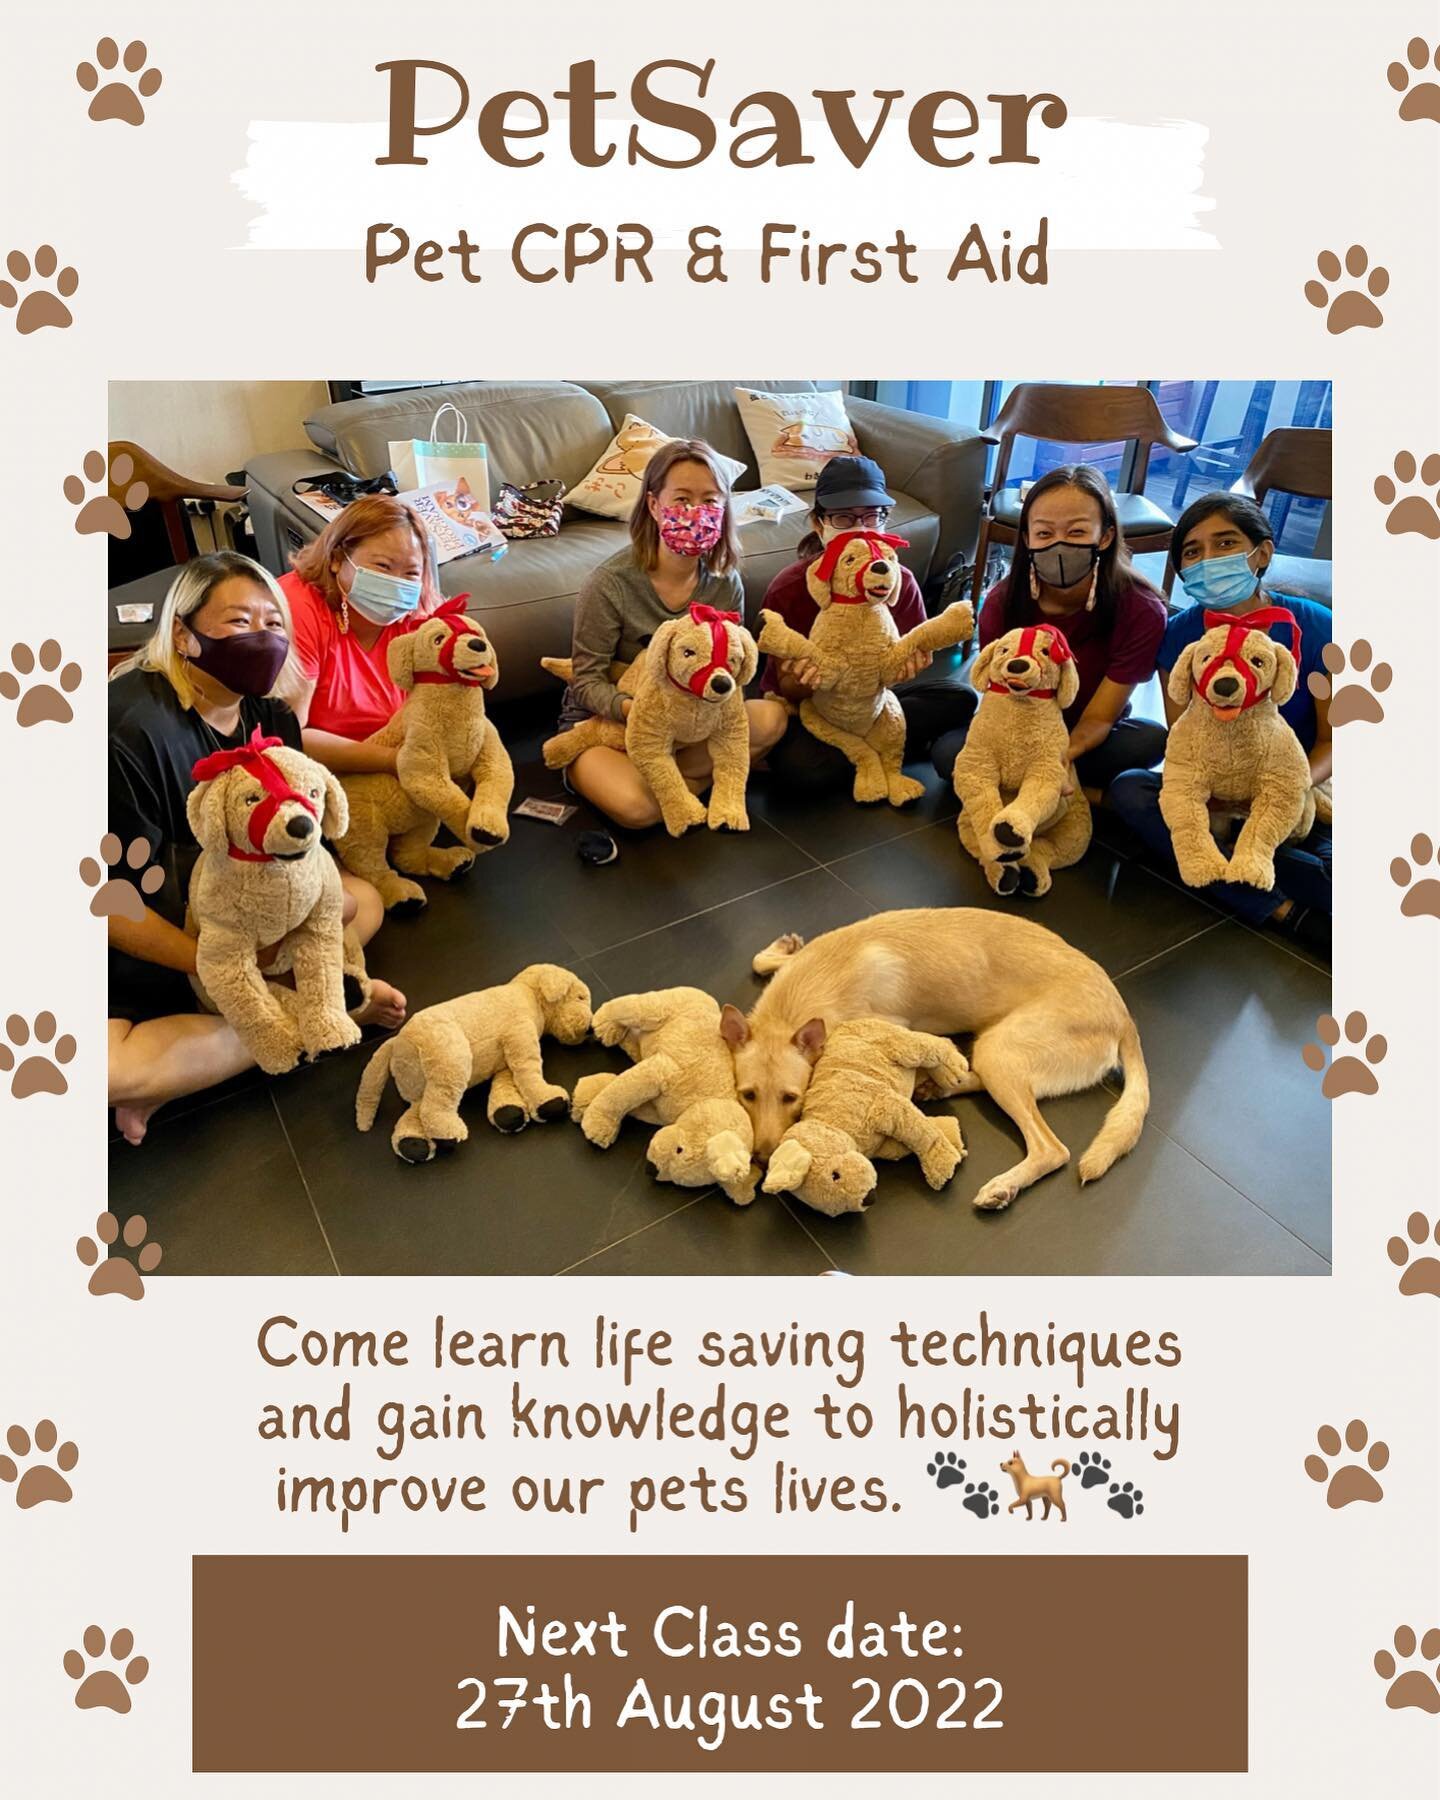 Announcing our next PetSaver class date! 
27th August 2022

Do contact us via our webpage for more details or PM us directly. 

Do note that class size is limited and registration is on a first come first served basis. Cheers! And stay safe, stay hea